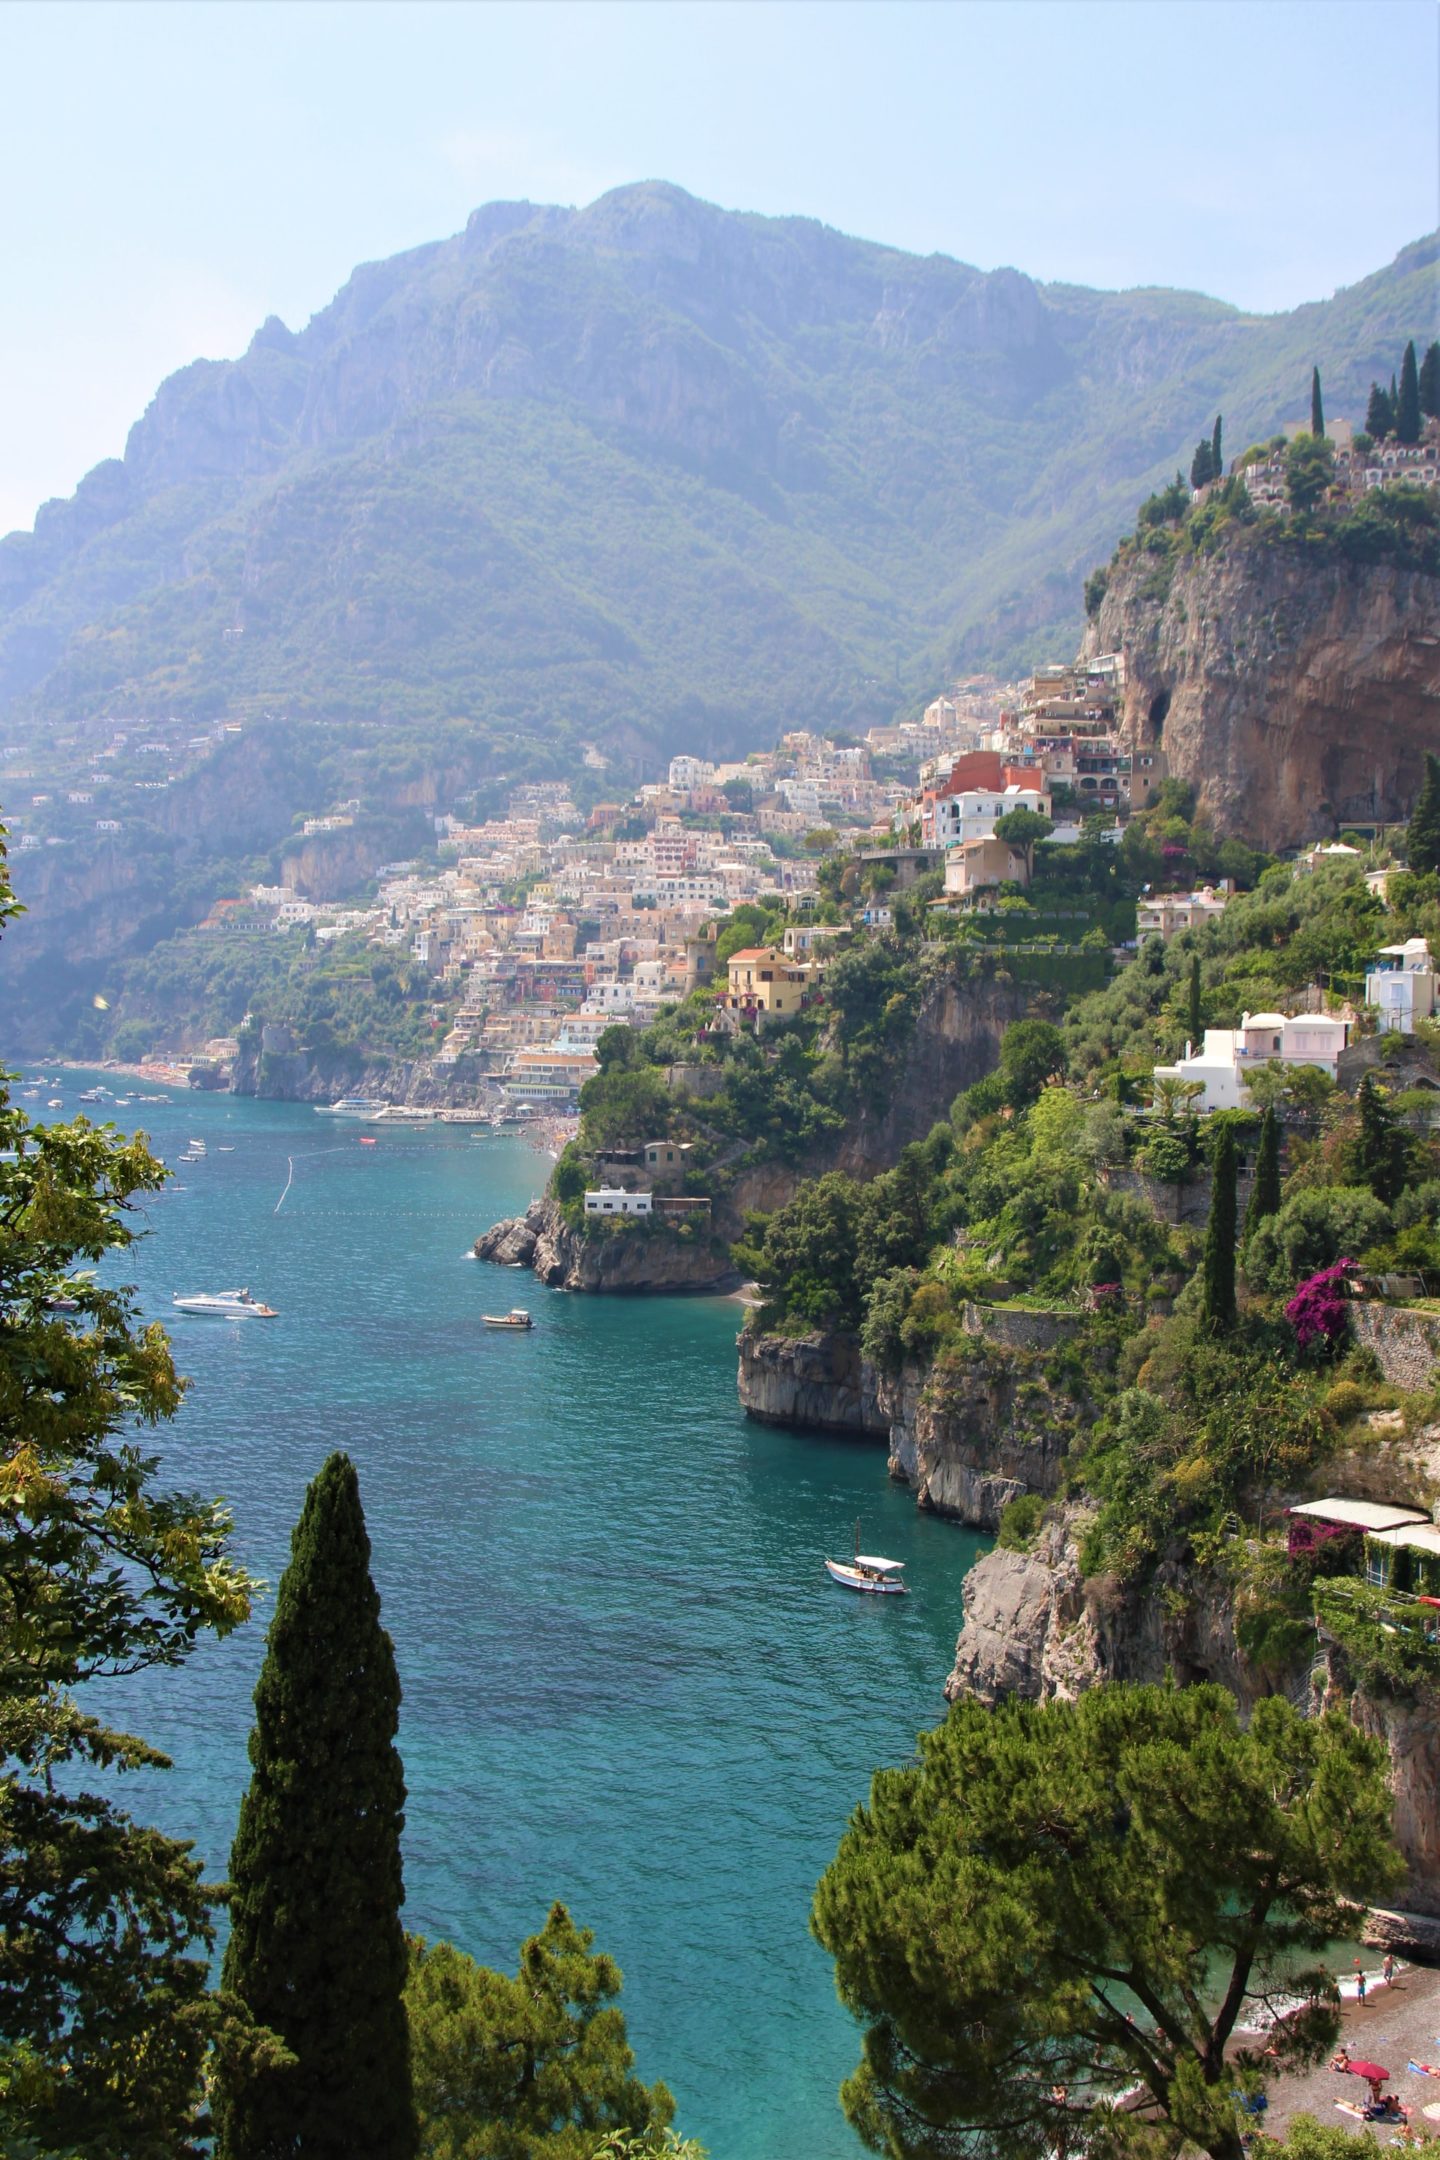 positano, nestled along the amalfi coast - a beautiful town to visit when in south italy